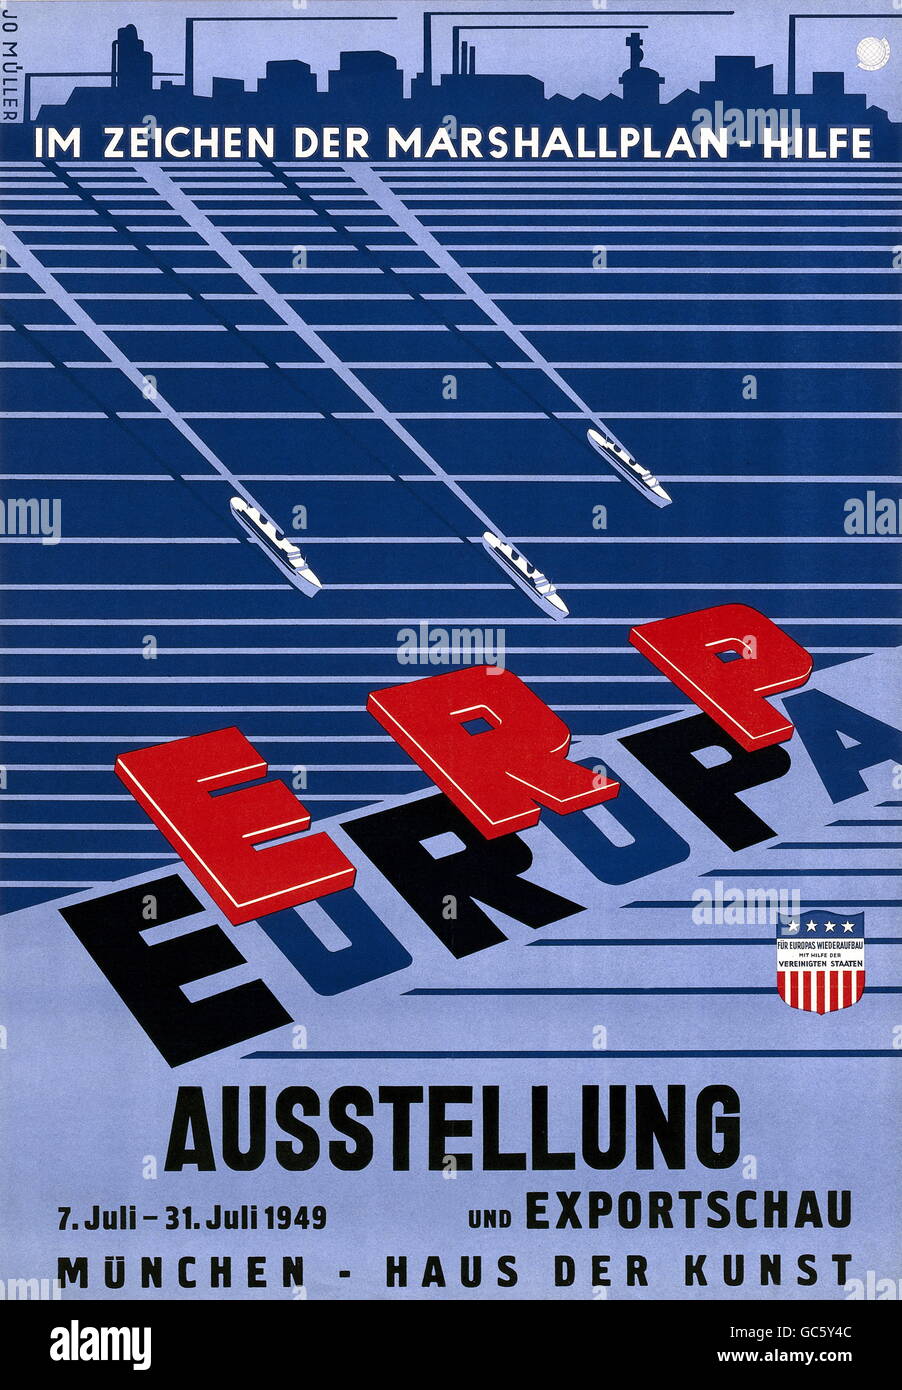 postwar period, Germany, reconstruction, European Recovery Program 1948 - 1952, exhibition, poster, Haus der Kunst, Munich, 7.- 31.7.1949, Additional-Rights-Clearences-Not Available Stock Photo